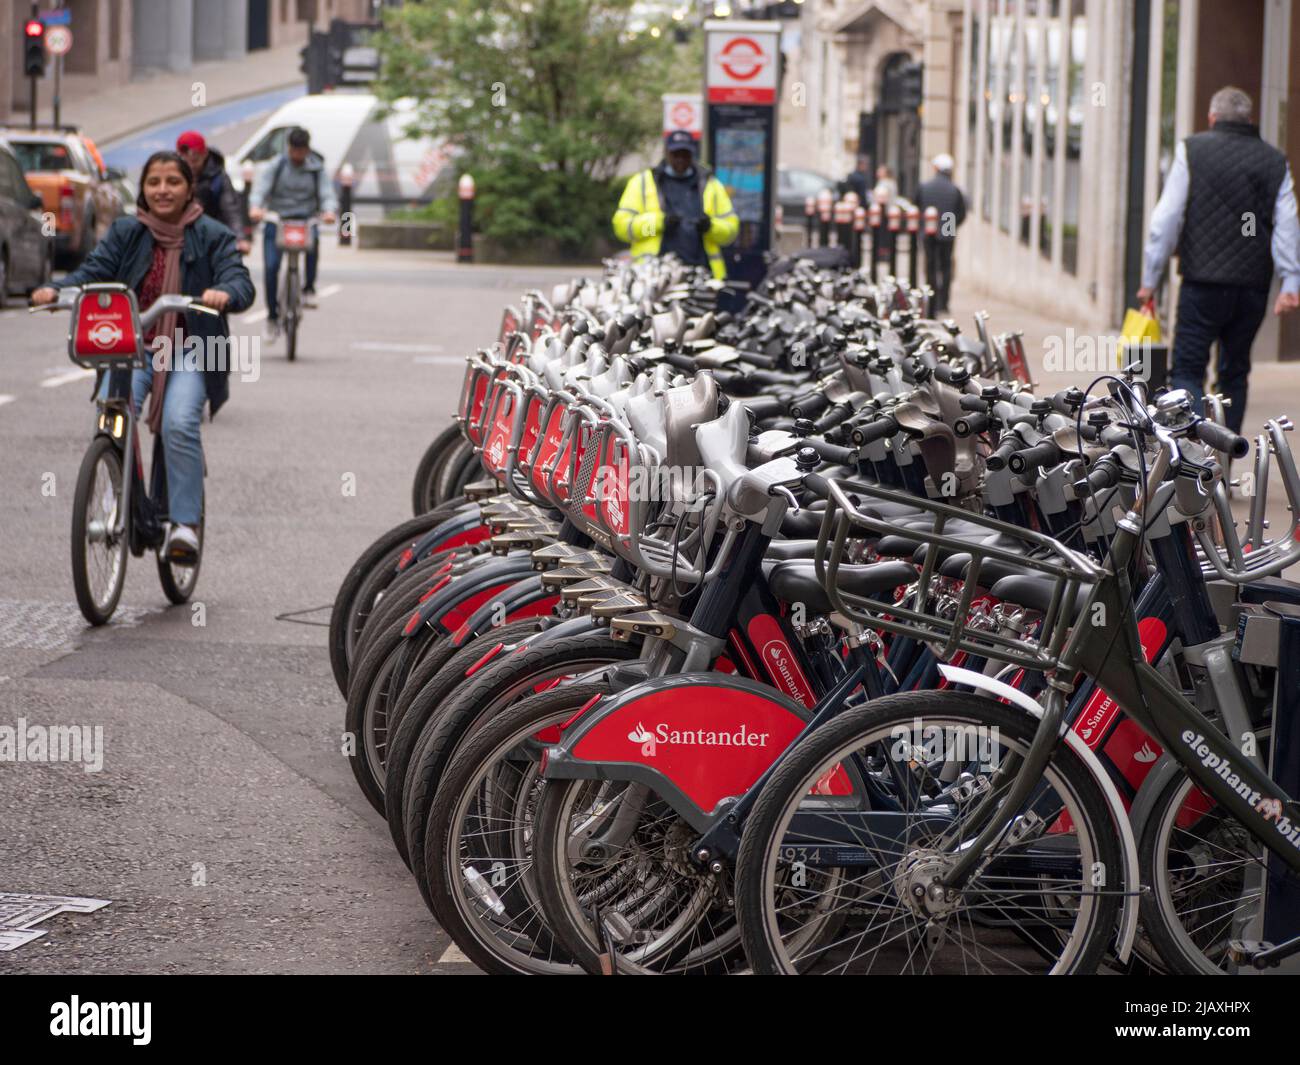 Rows of Santander rental bikes for hire in Central London Stock Photo